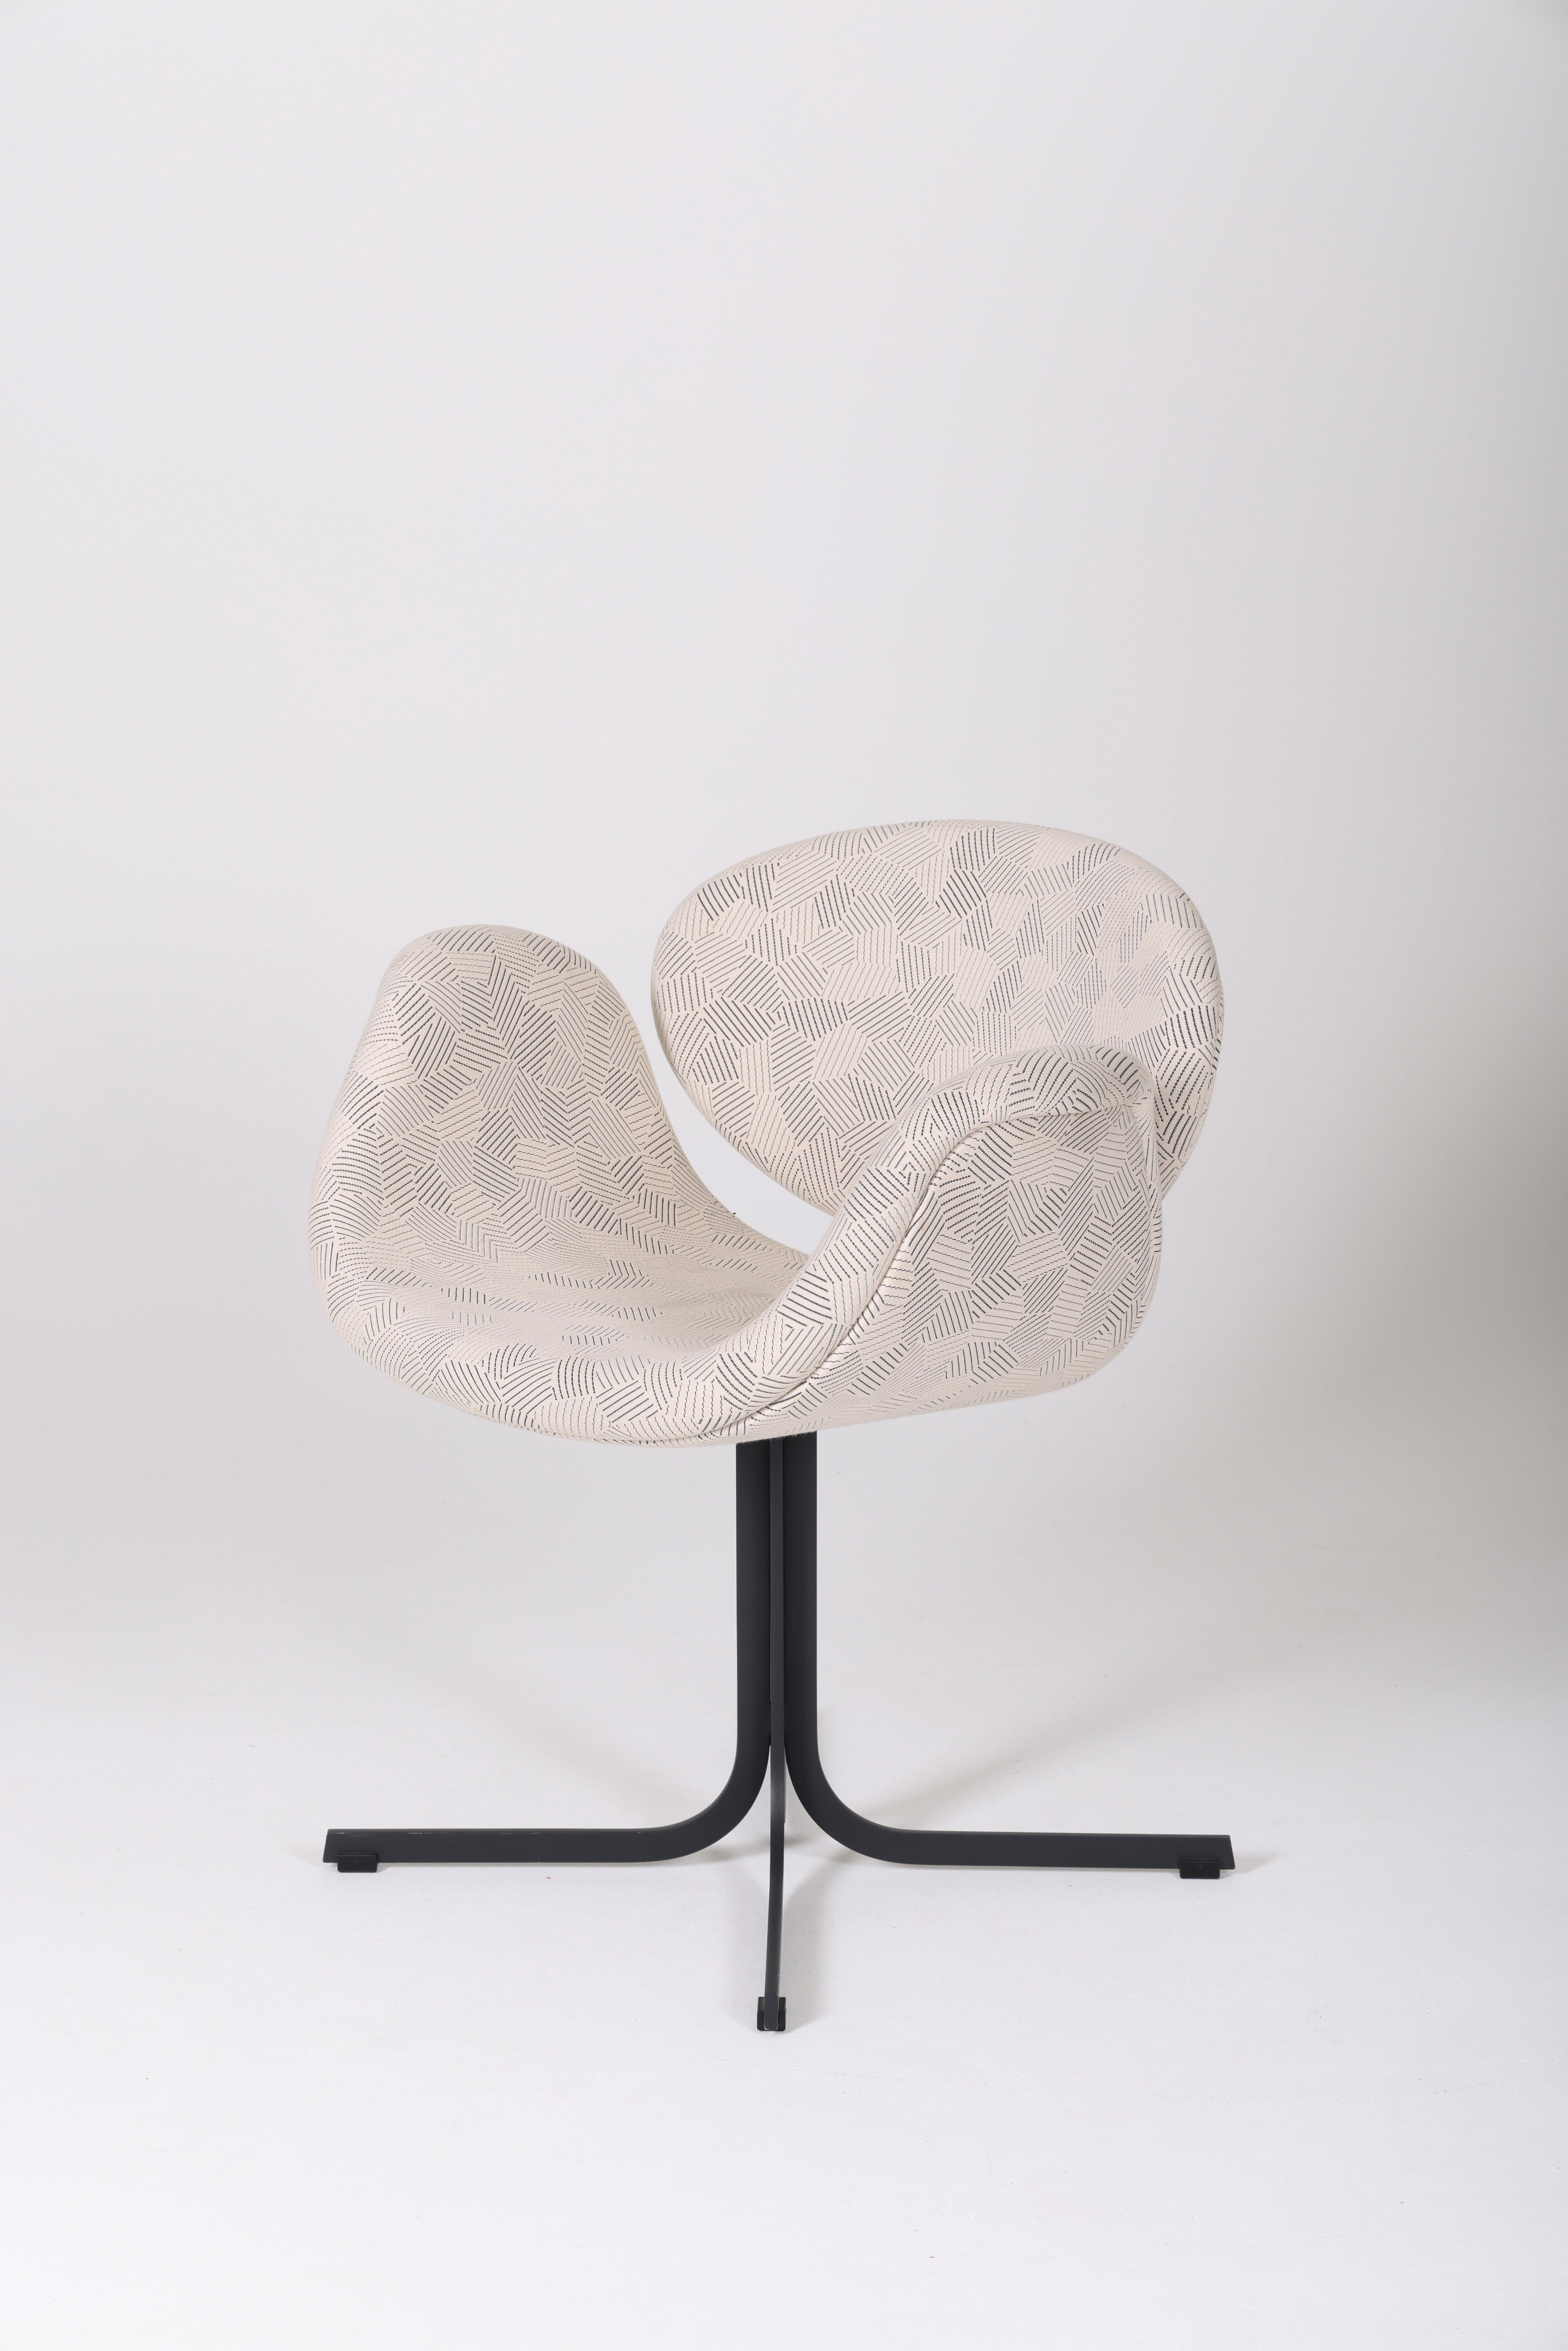 Tulip armchair designed by Pierre Paulin, published by Artifort in the 1960s. Black aluminum base, gray and white patterned fabric. In very good condition.
LP979